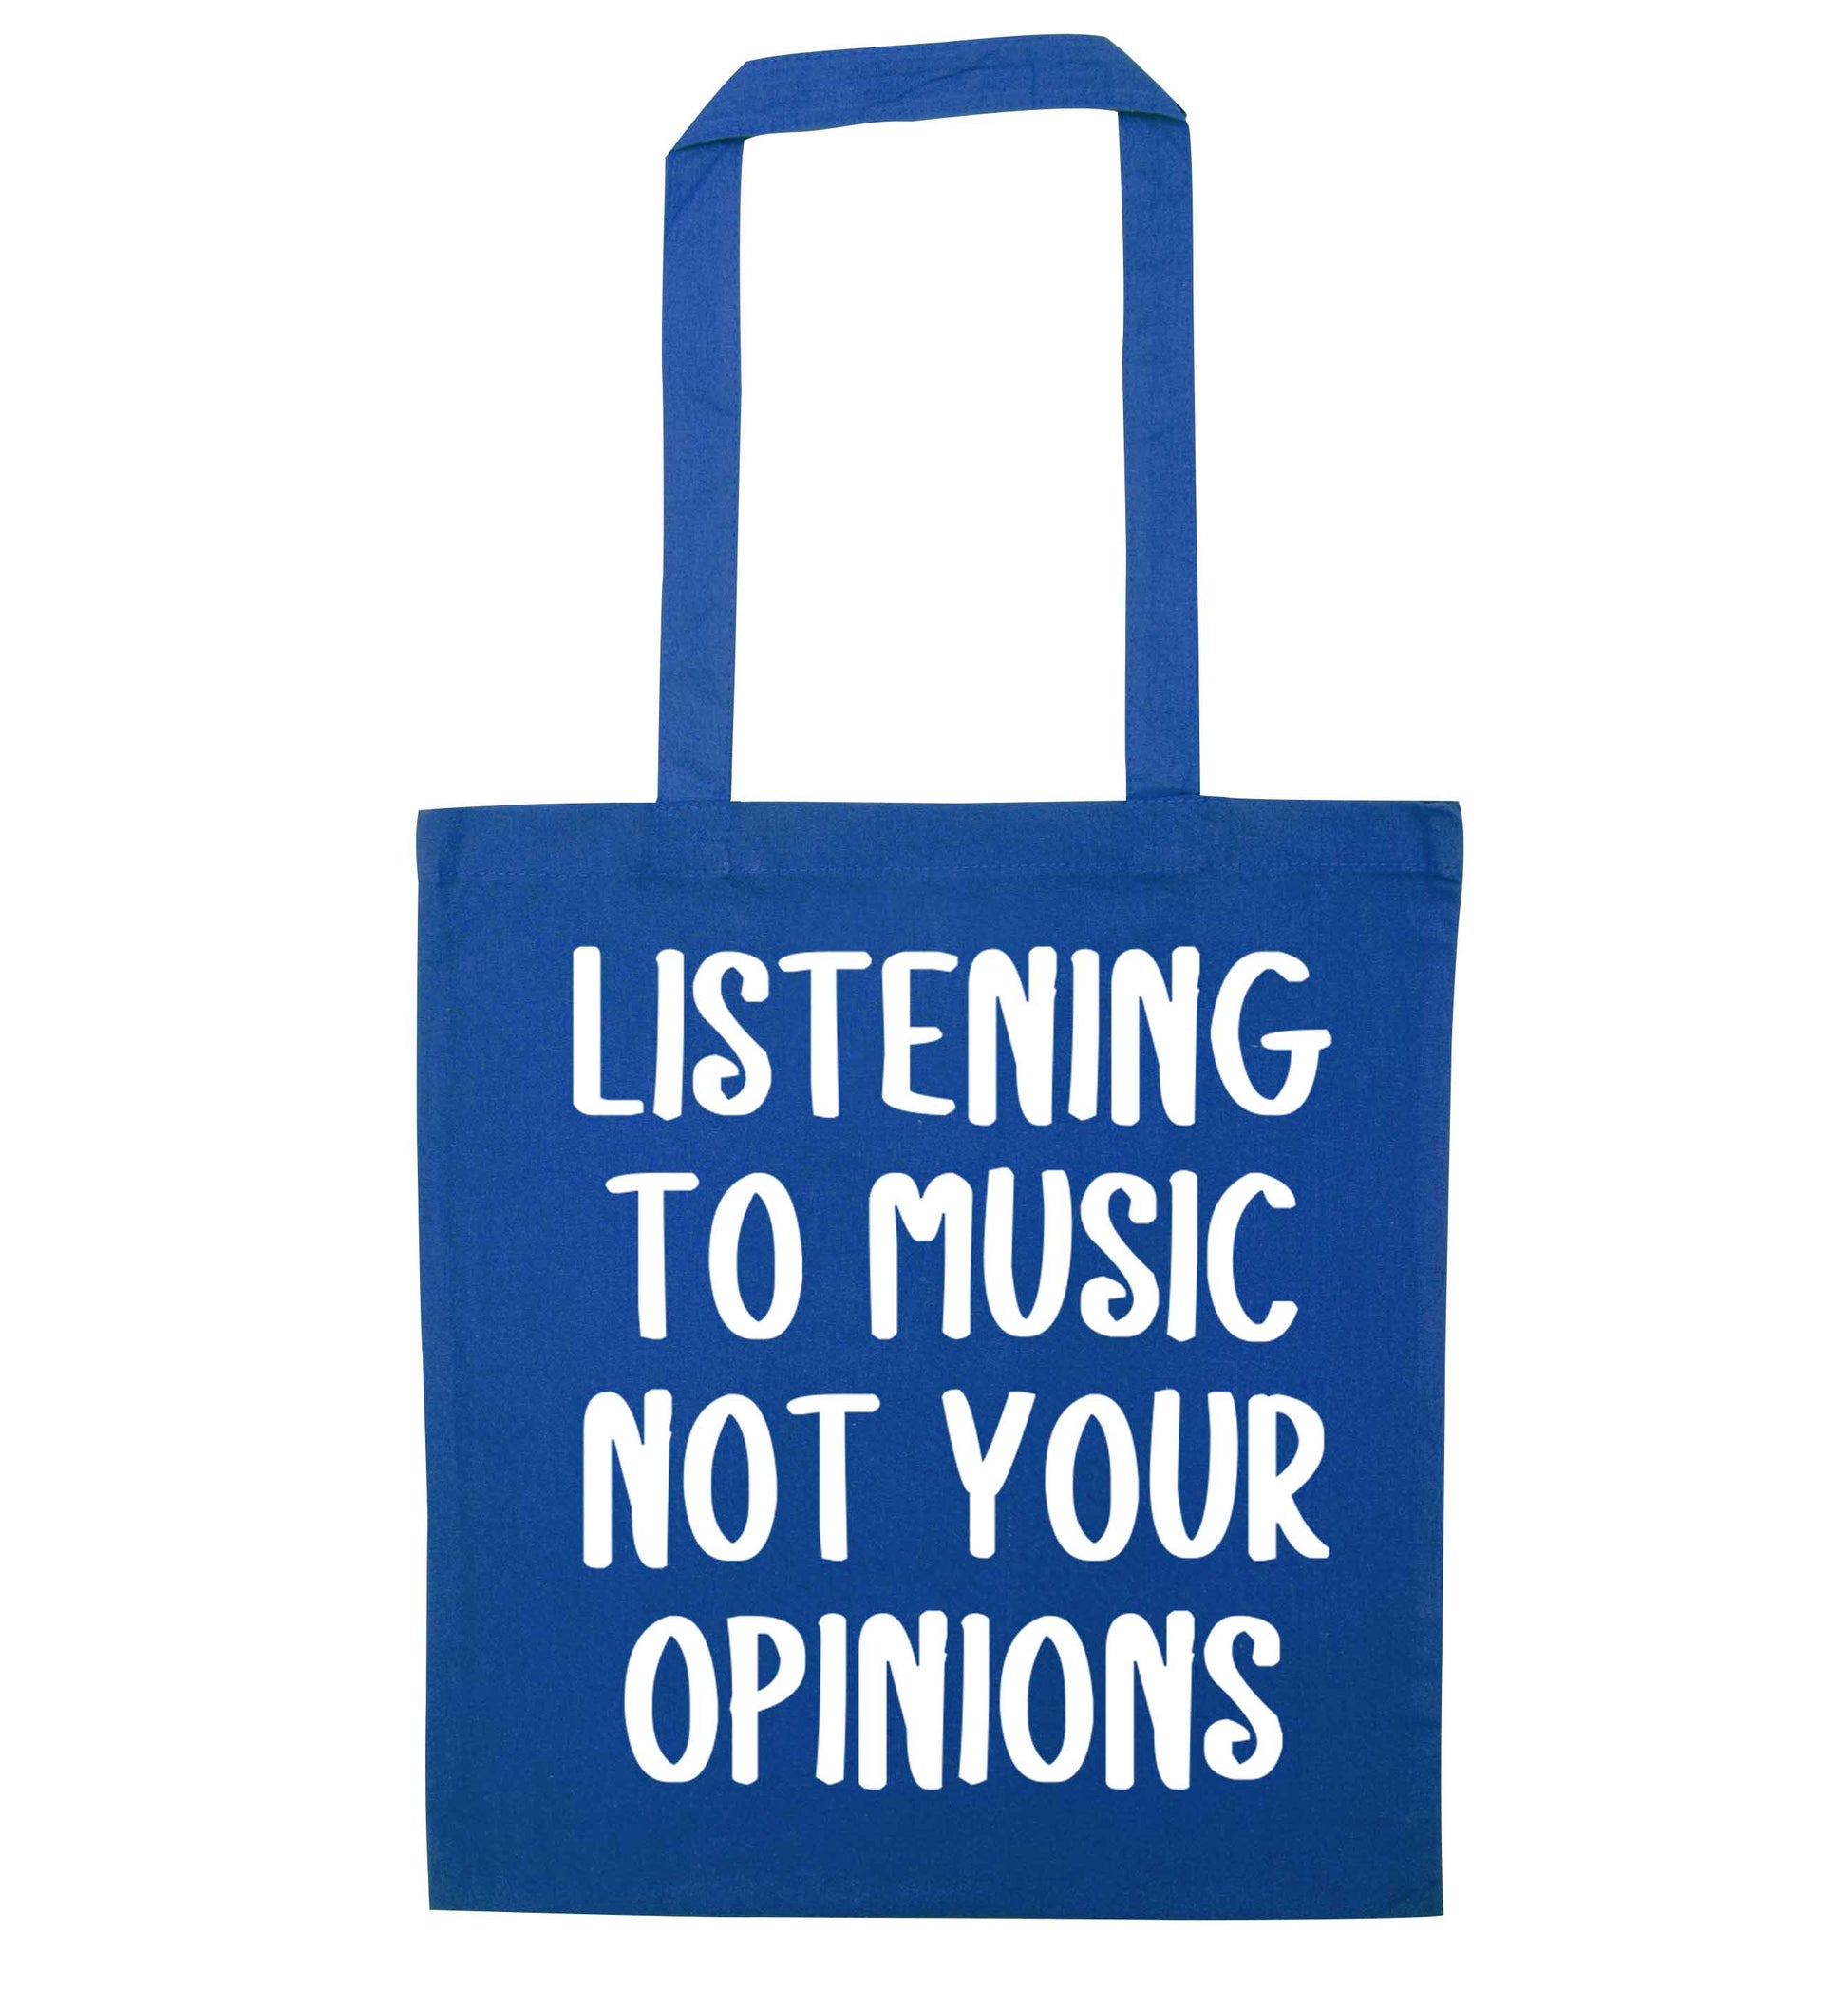 Listening to music not your opinions blue tote bag